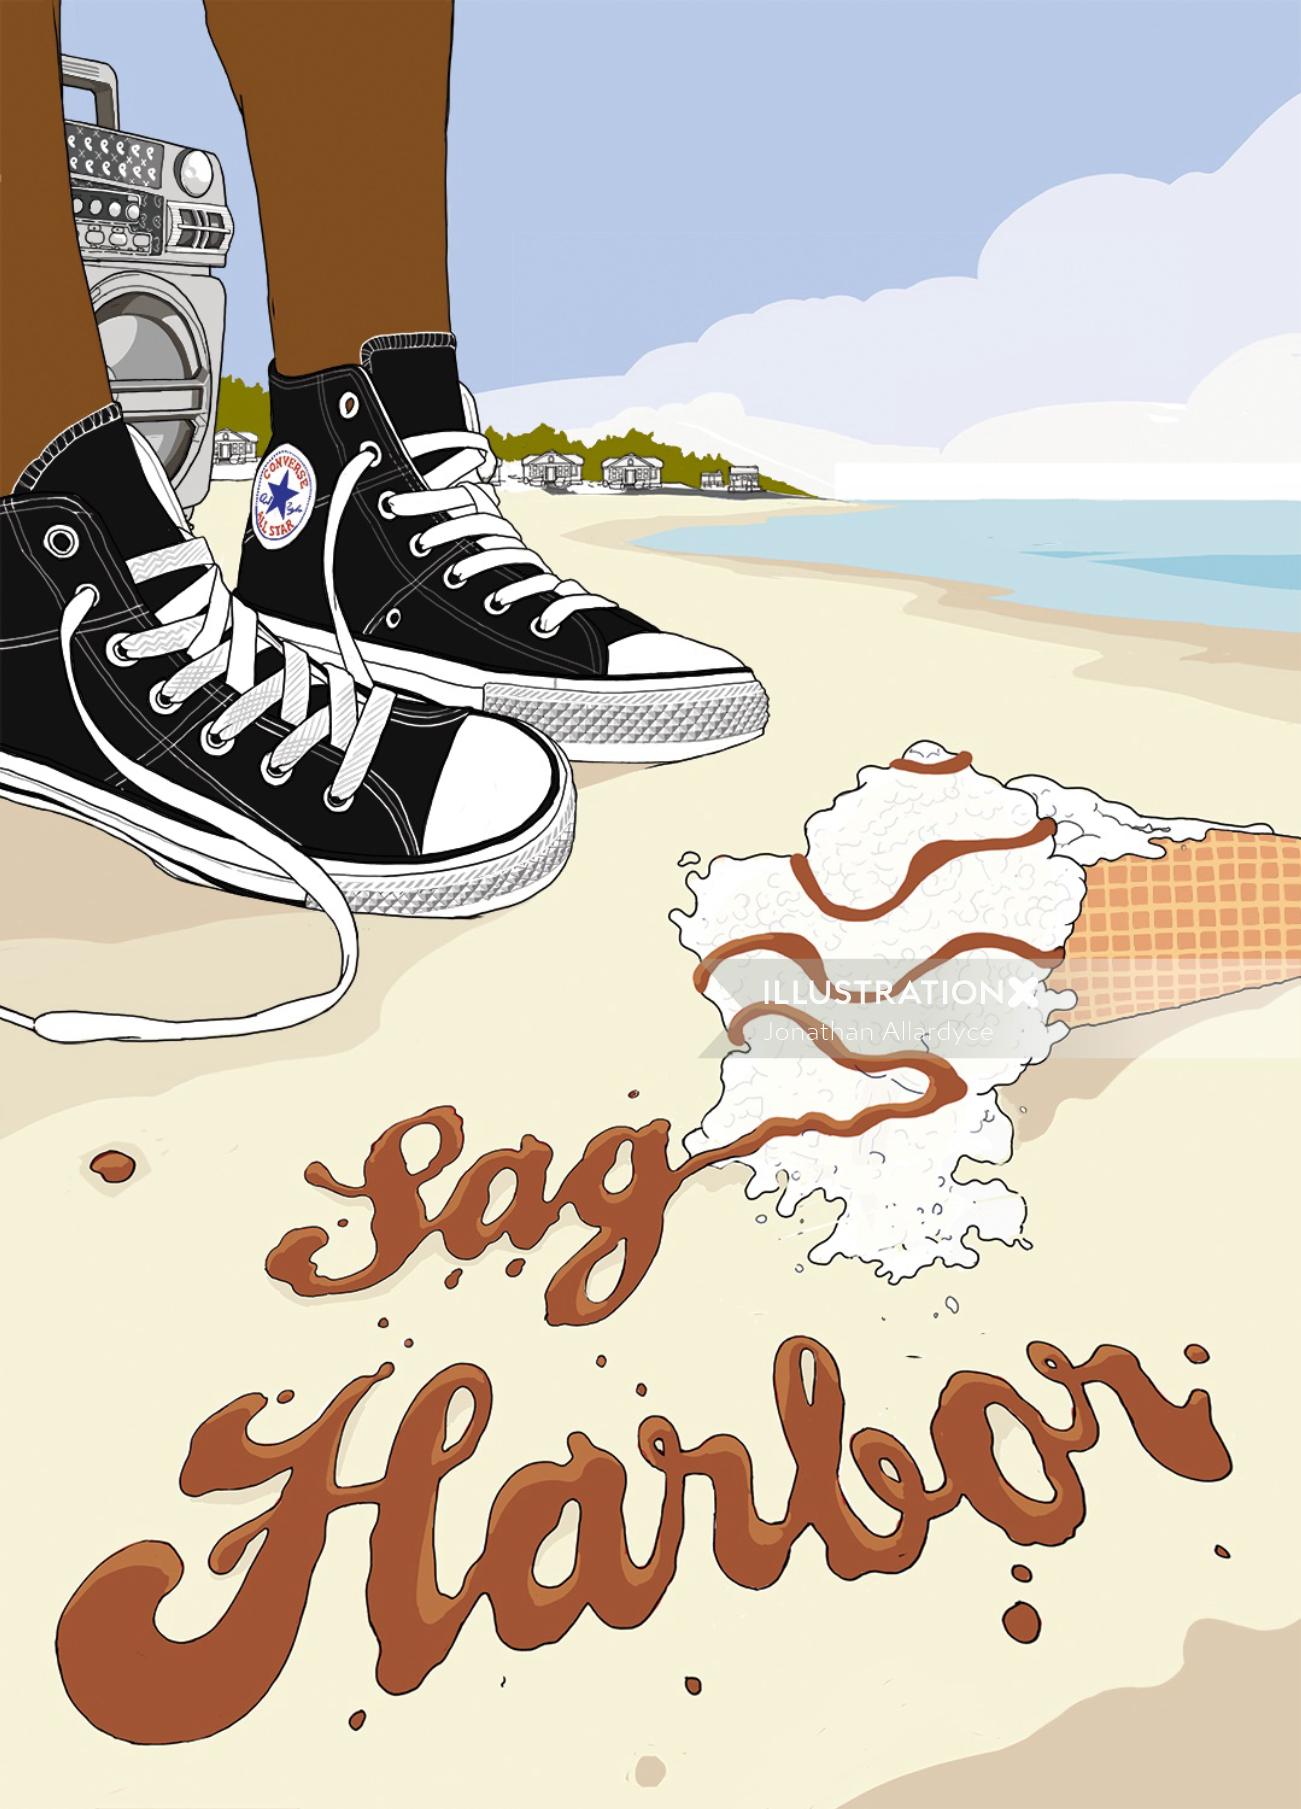 Cover artwork for Colson Whitehead's coming of age novel Sag Harbor